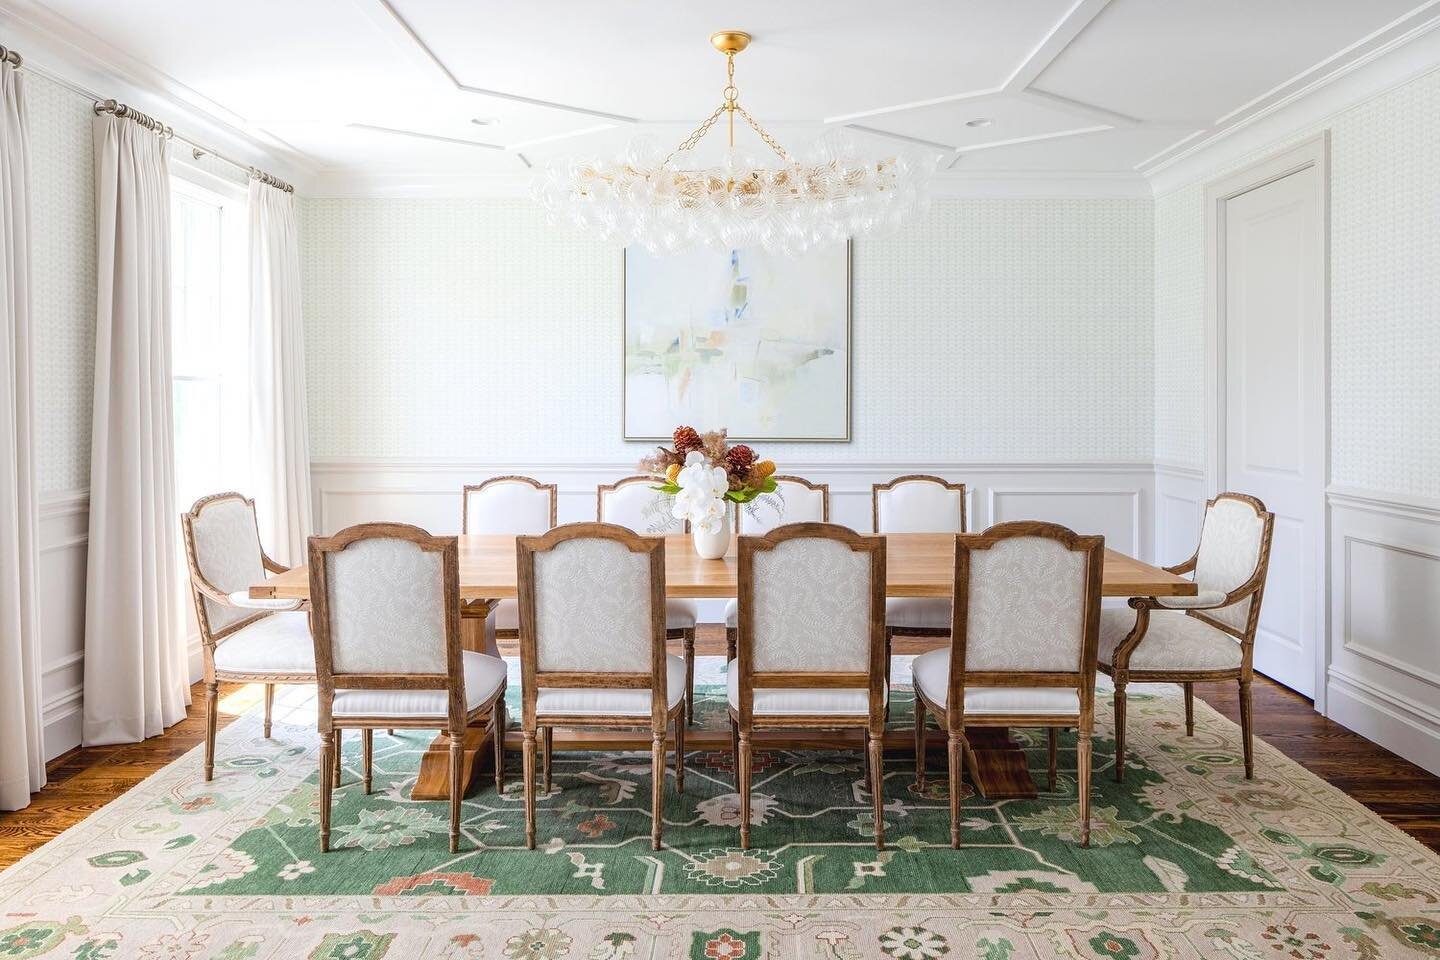 A dining room fit or a feast. Happy thanksgiving everyone! 

📸 by @kylejcaldwell 
.
.
#interiordesign #interiordesigner #homedecor #homestyling #montclairnj #scarsdale_moms #scarsdale #homerenovation #diningroom #diningroomdecor #luxeinteriors #vogu